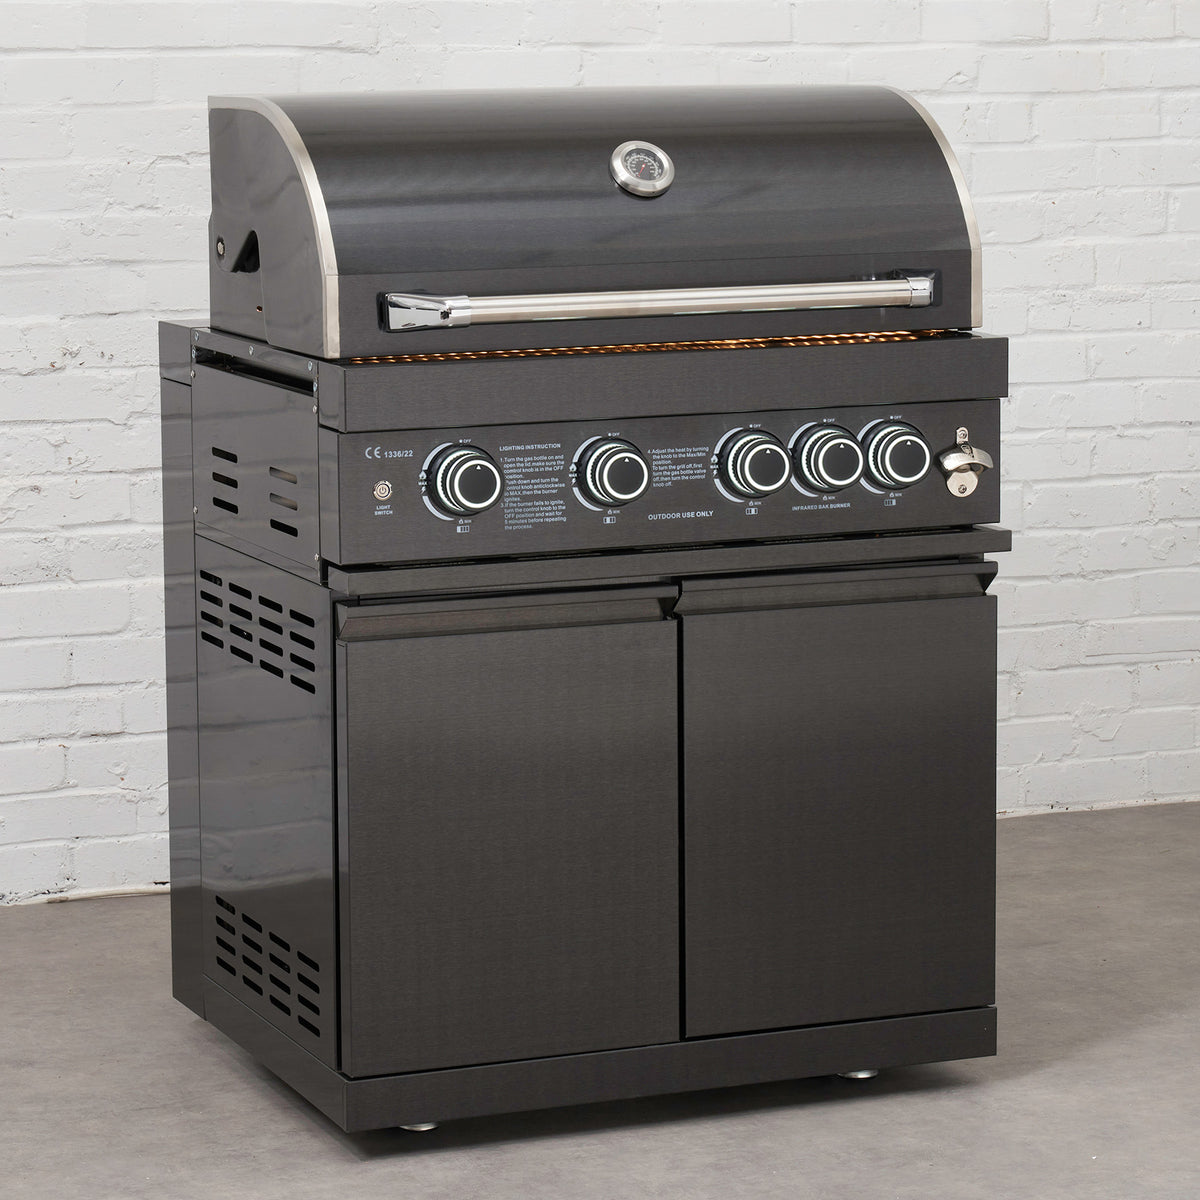 Draco Grills 4 Burner BBQ Black Stainless Steel Modular Outdoor Kitchen with Sear Station and Cabinets